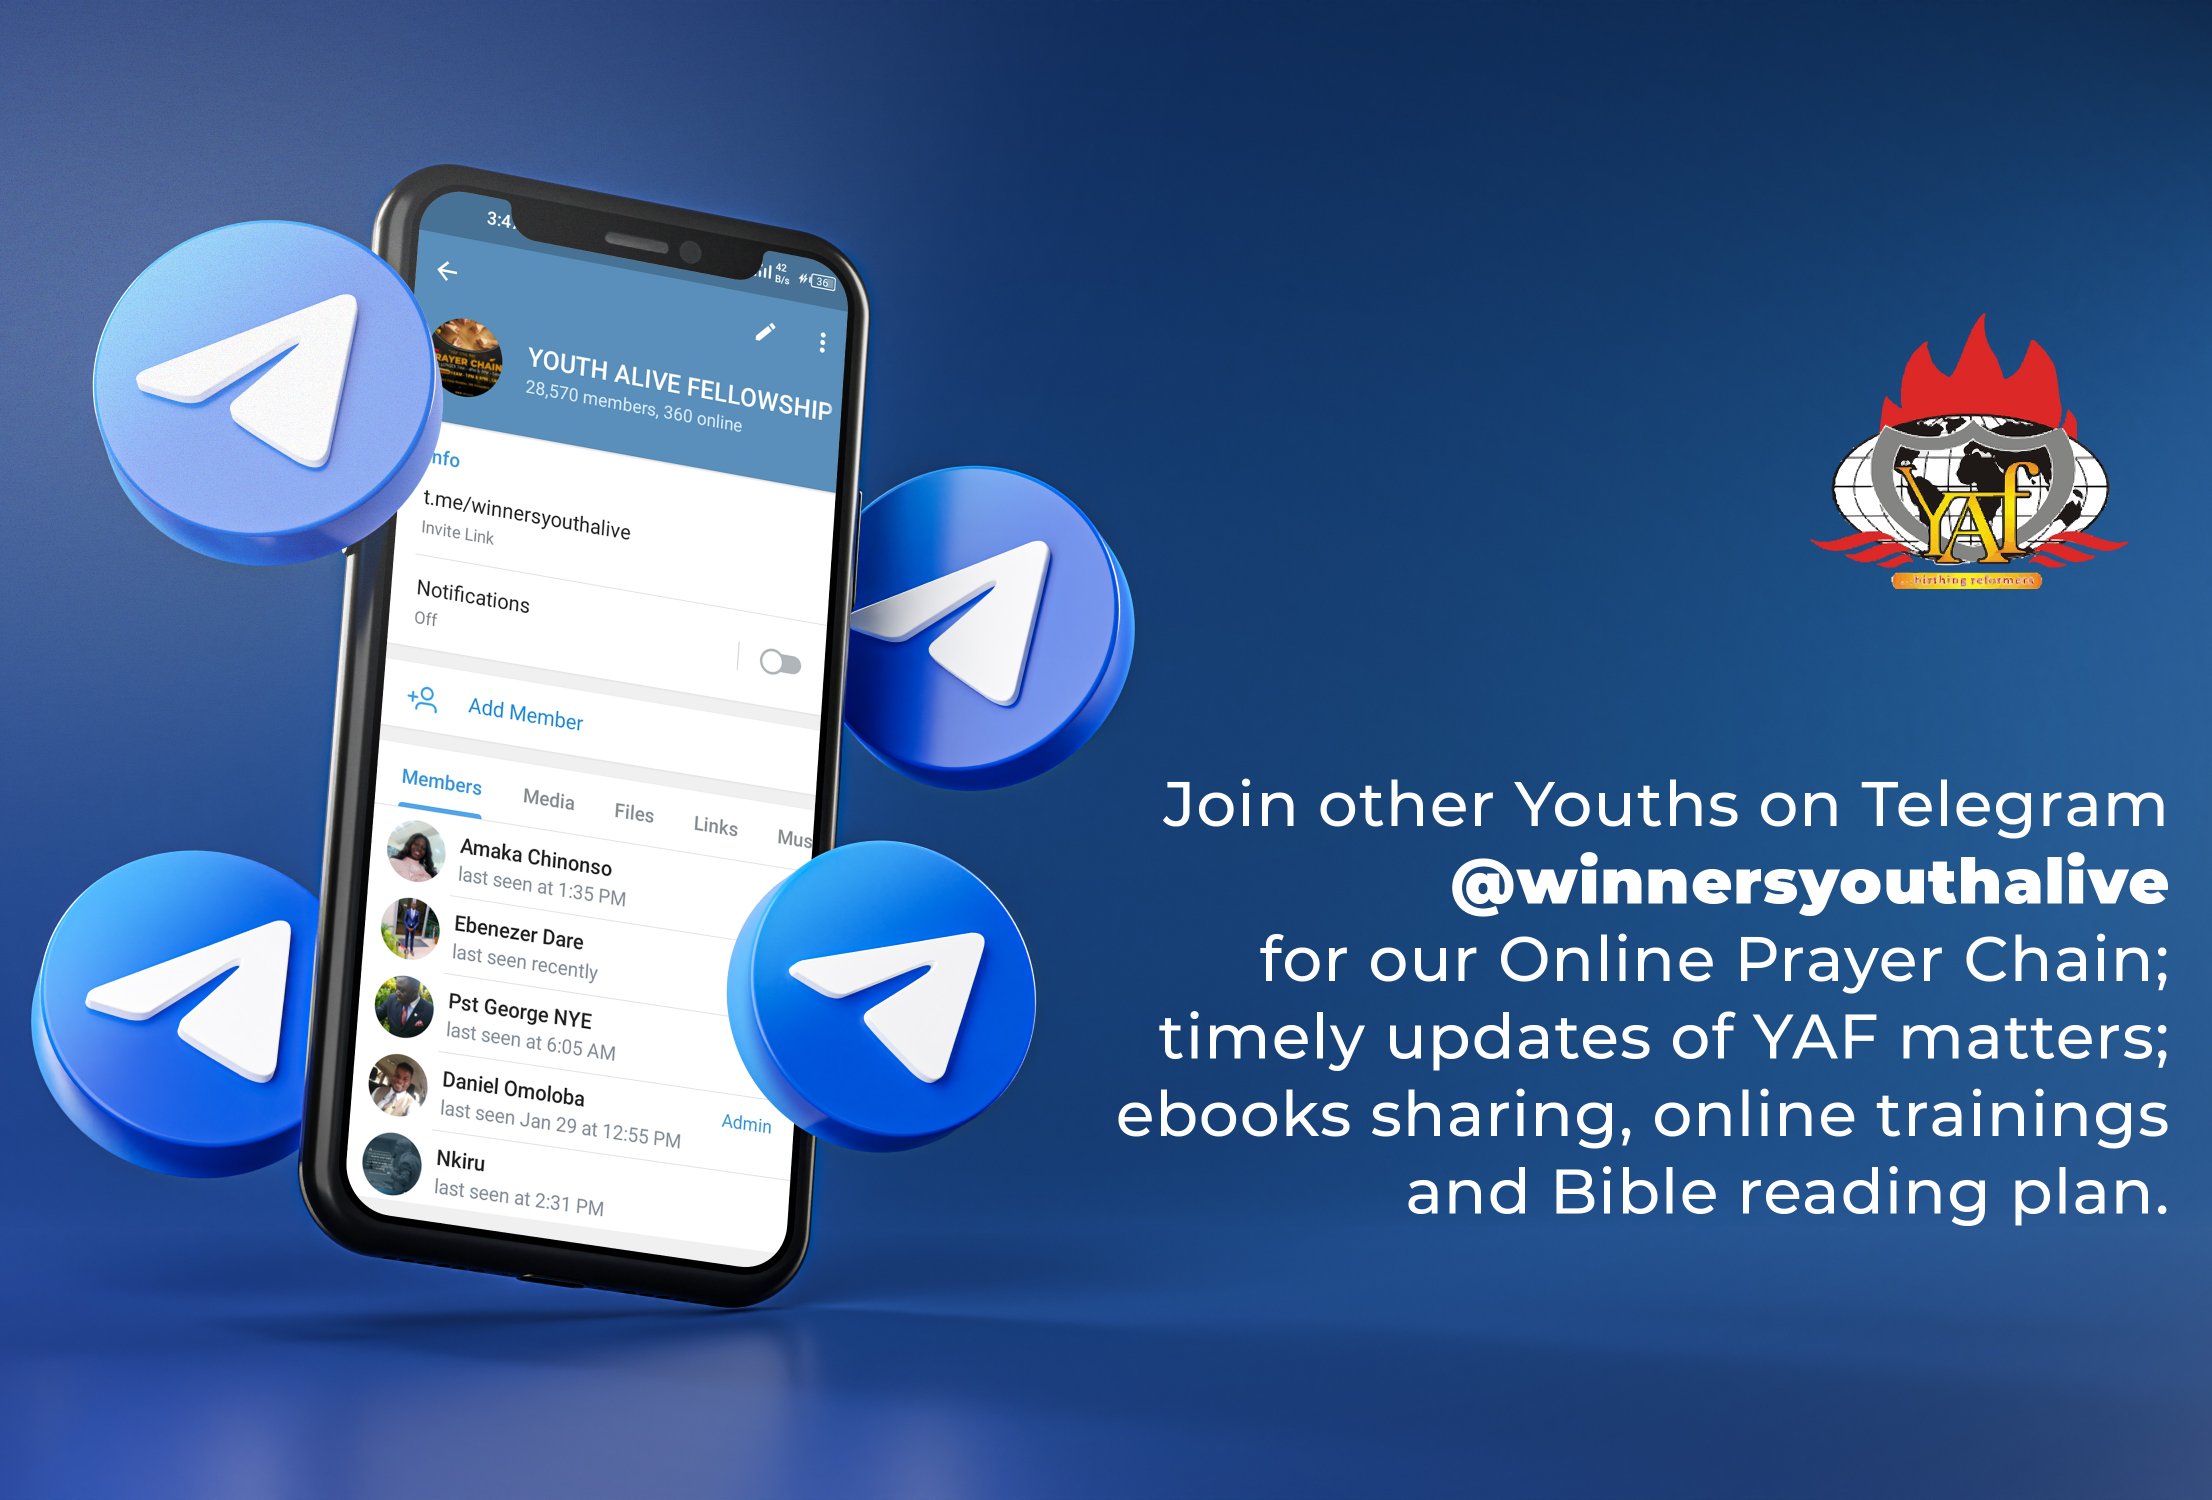 Winners Youth Alive on X: Join other youths on telegram @winnersyouthalive  for our ongoing Online Prayer Chain. You can get that long desired  breakthrough as make the Kingdom of God our priority.